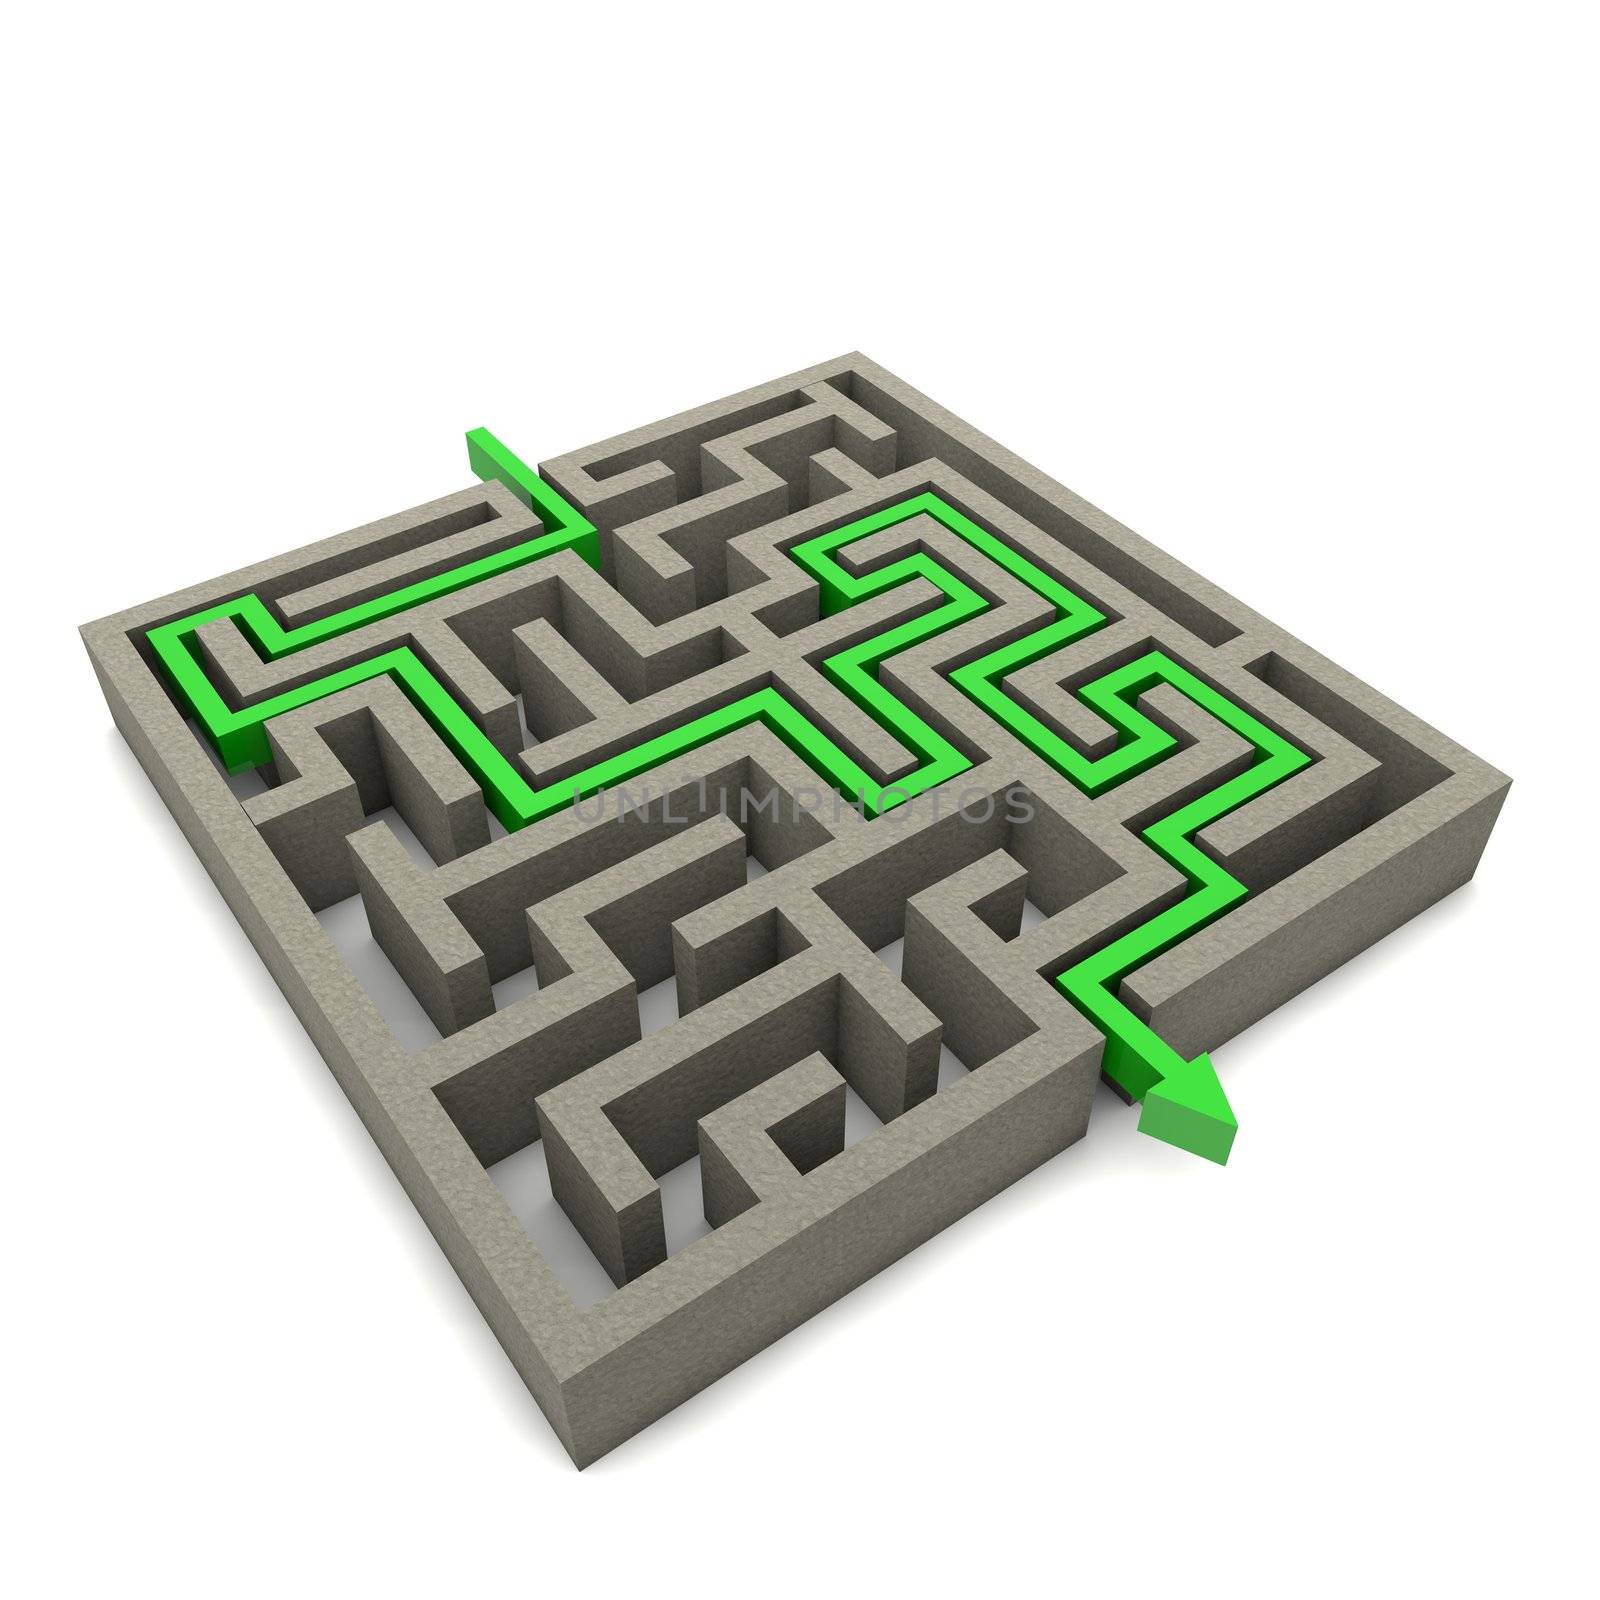 The labyrinth is a serious consequence of decisions to come out of the dark and become successful